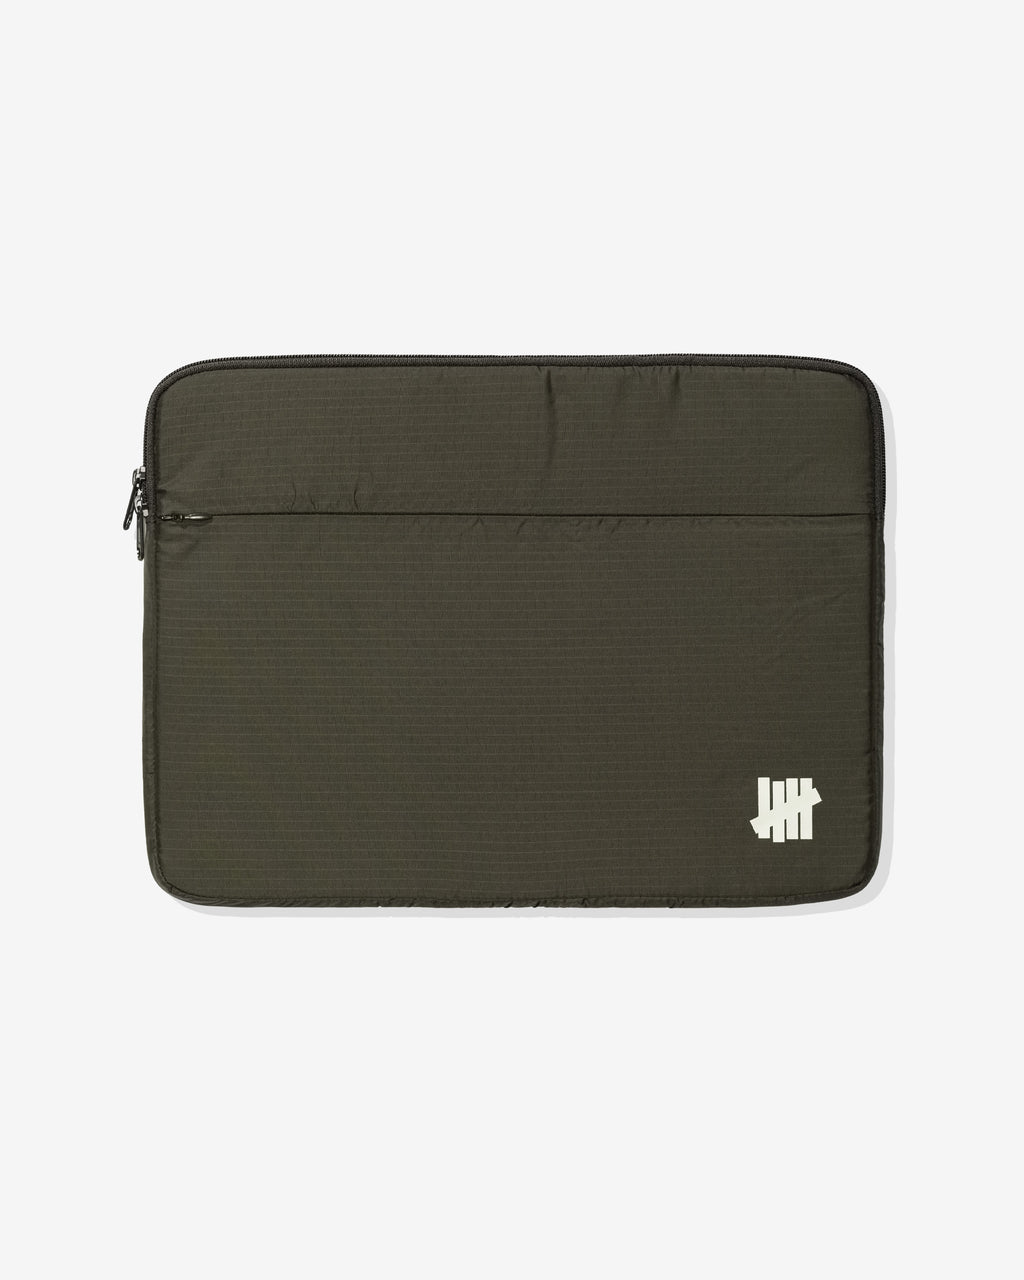 UNDEFEATED RIPSTOP LAPTOP SLEEVE - OLIVE